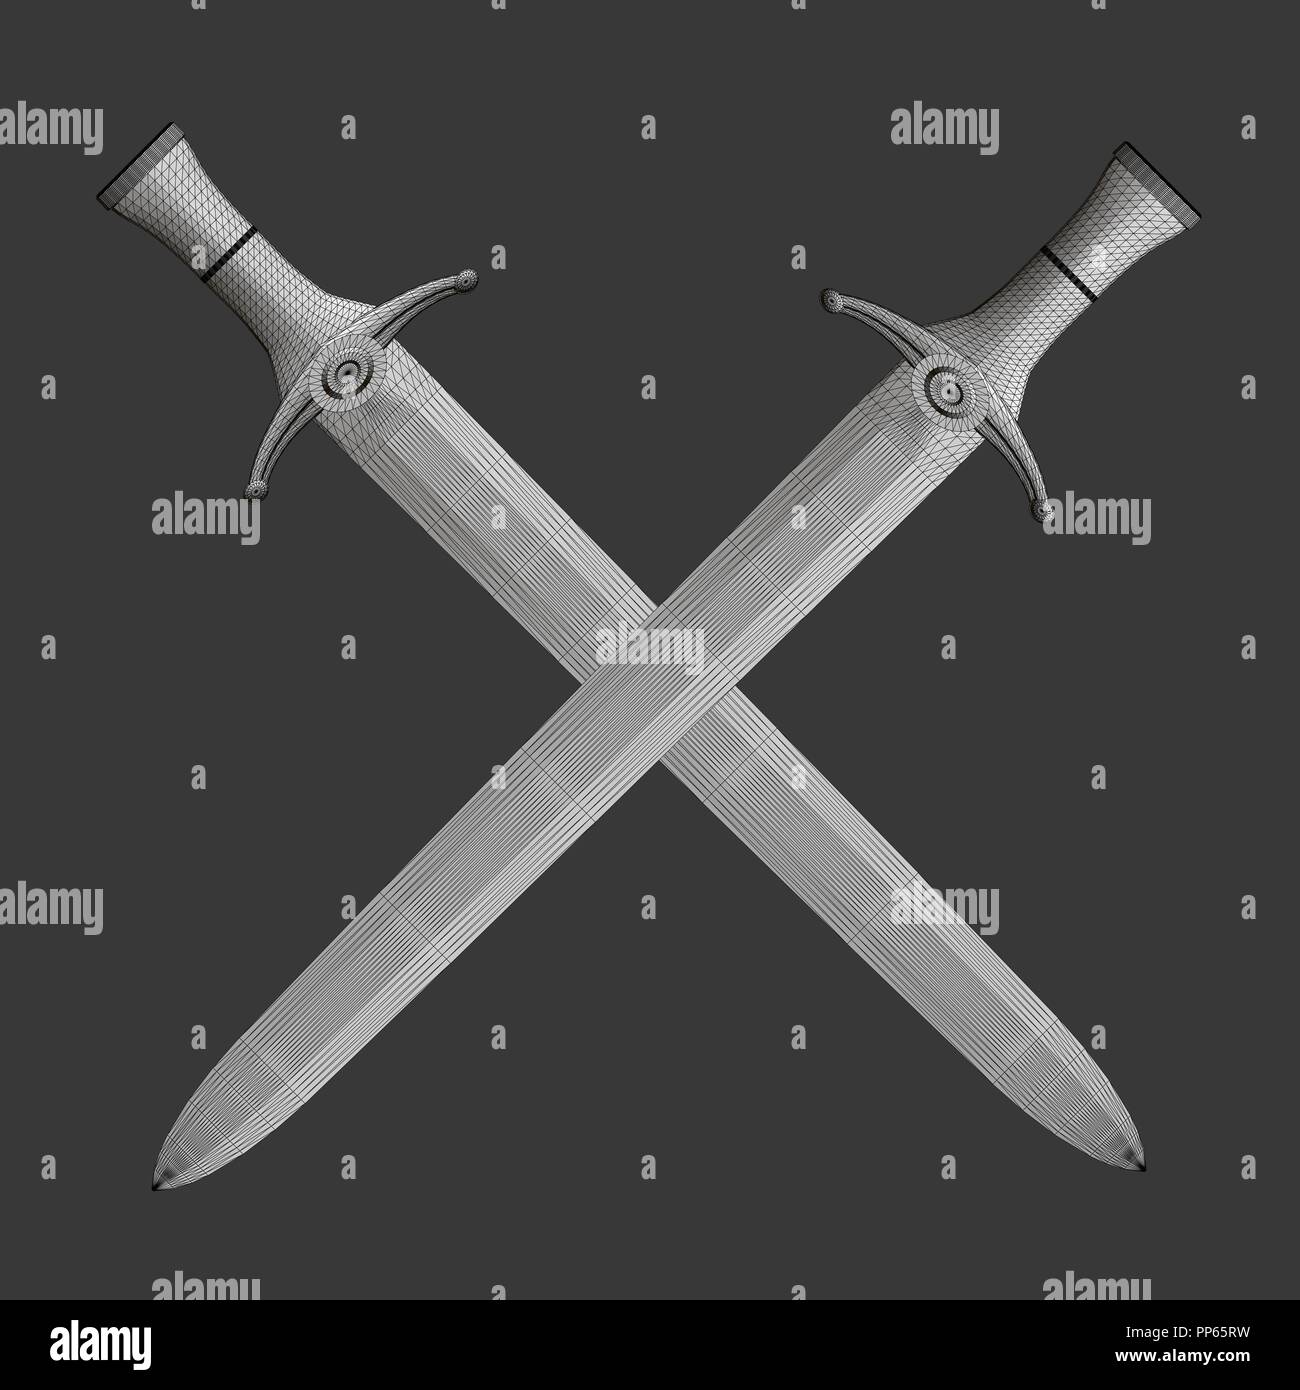 Two Crossed Swords On Image & Photo (Free Trial)